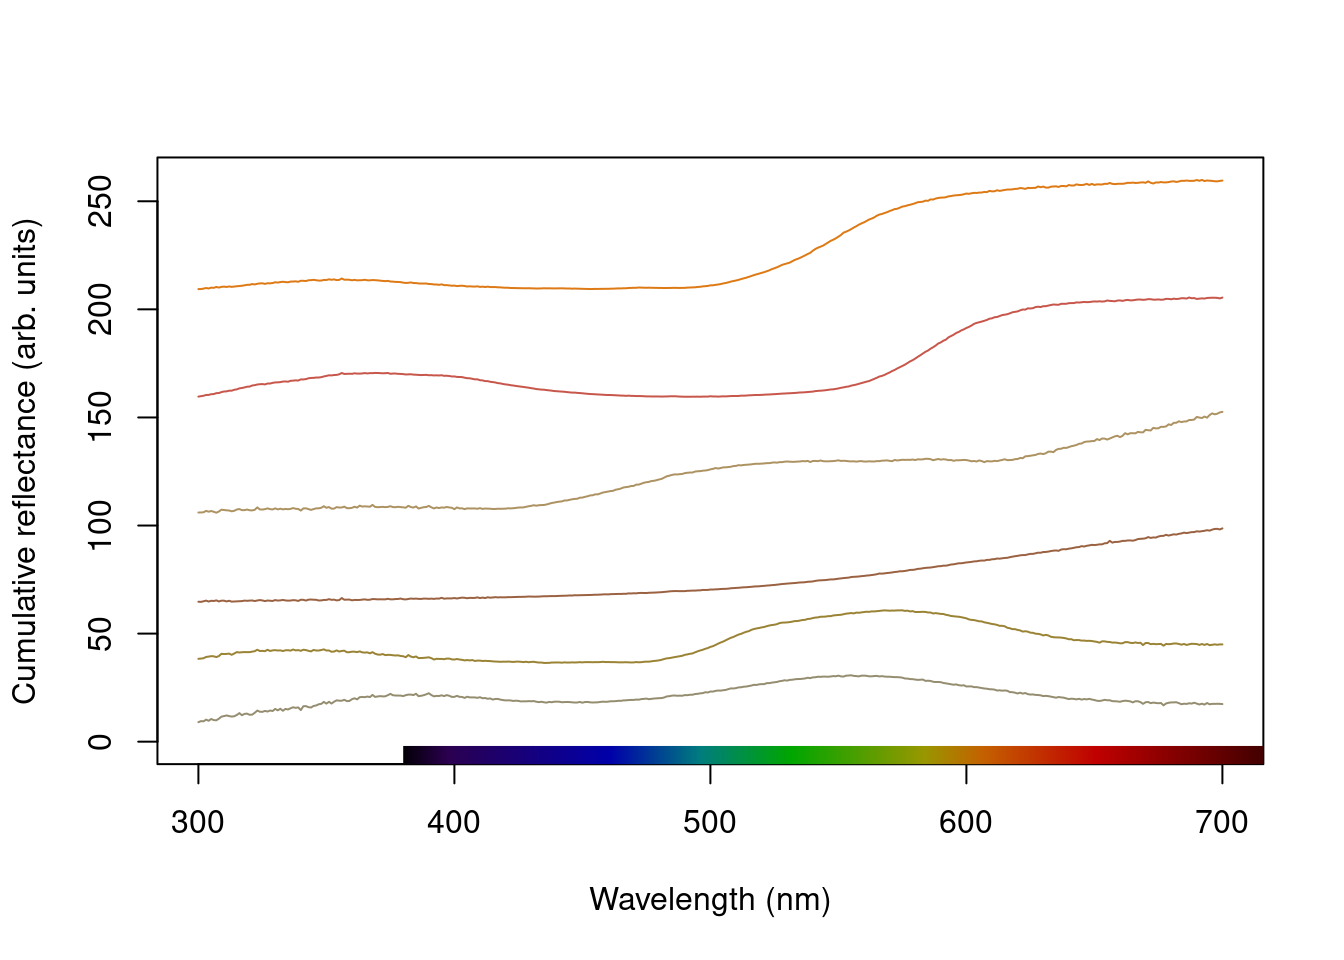 Plot of PC1 loading versus wavelength (left) and species mean spectra sorted vertically from lowest to highest PC1 value (right; values on right hand axis are column identities).